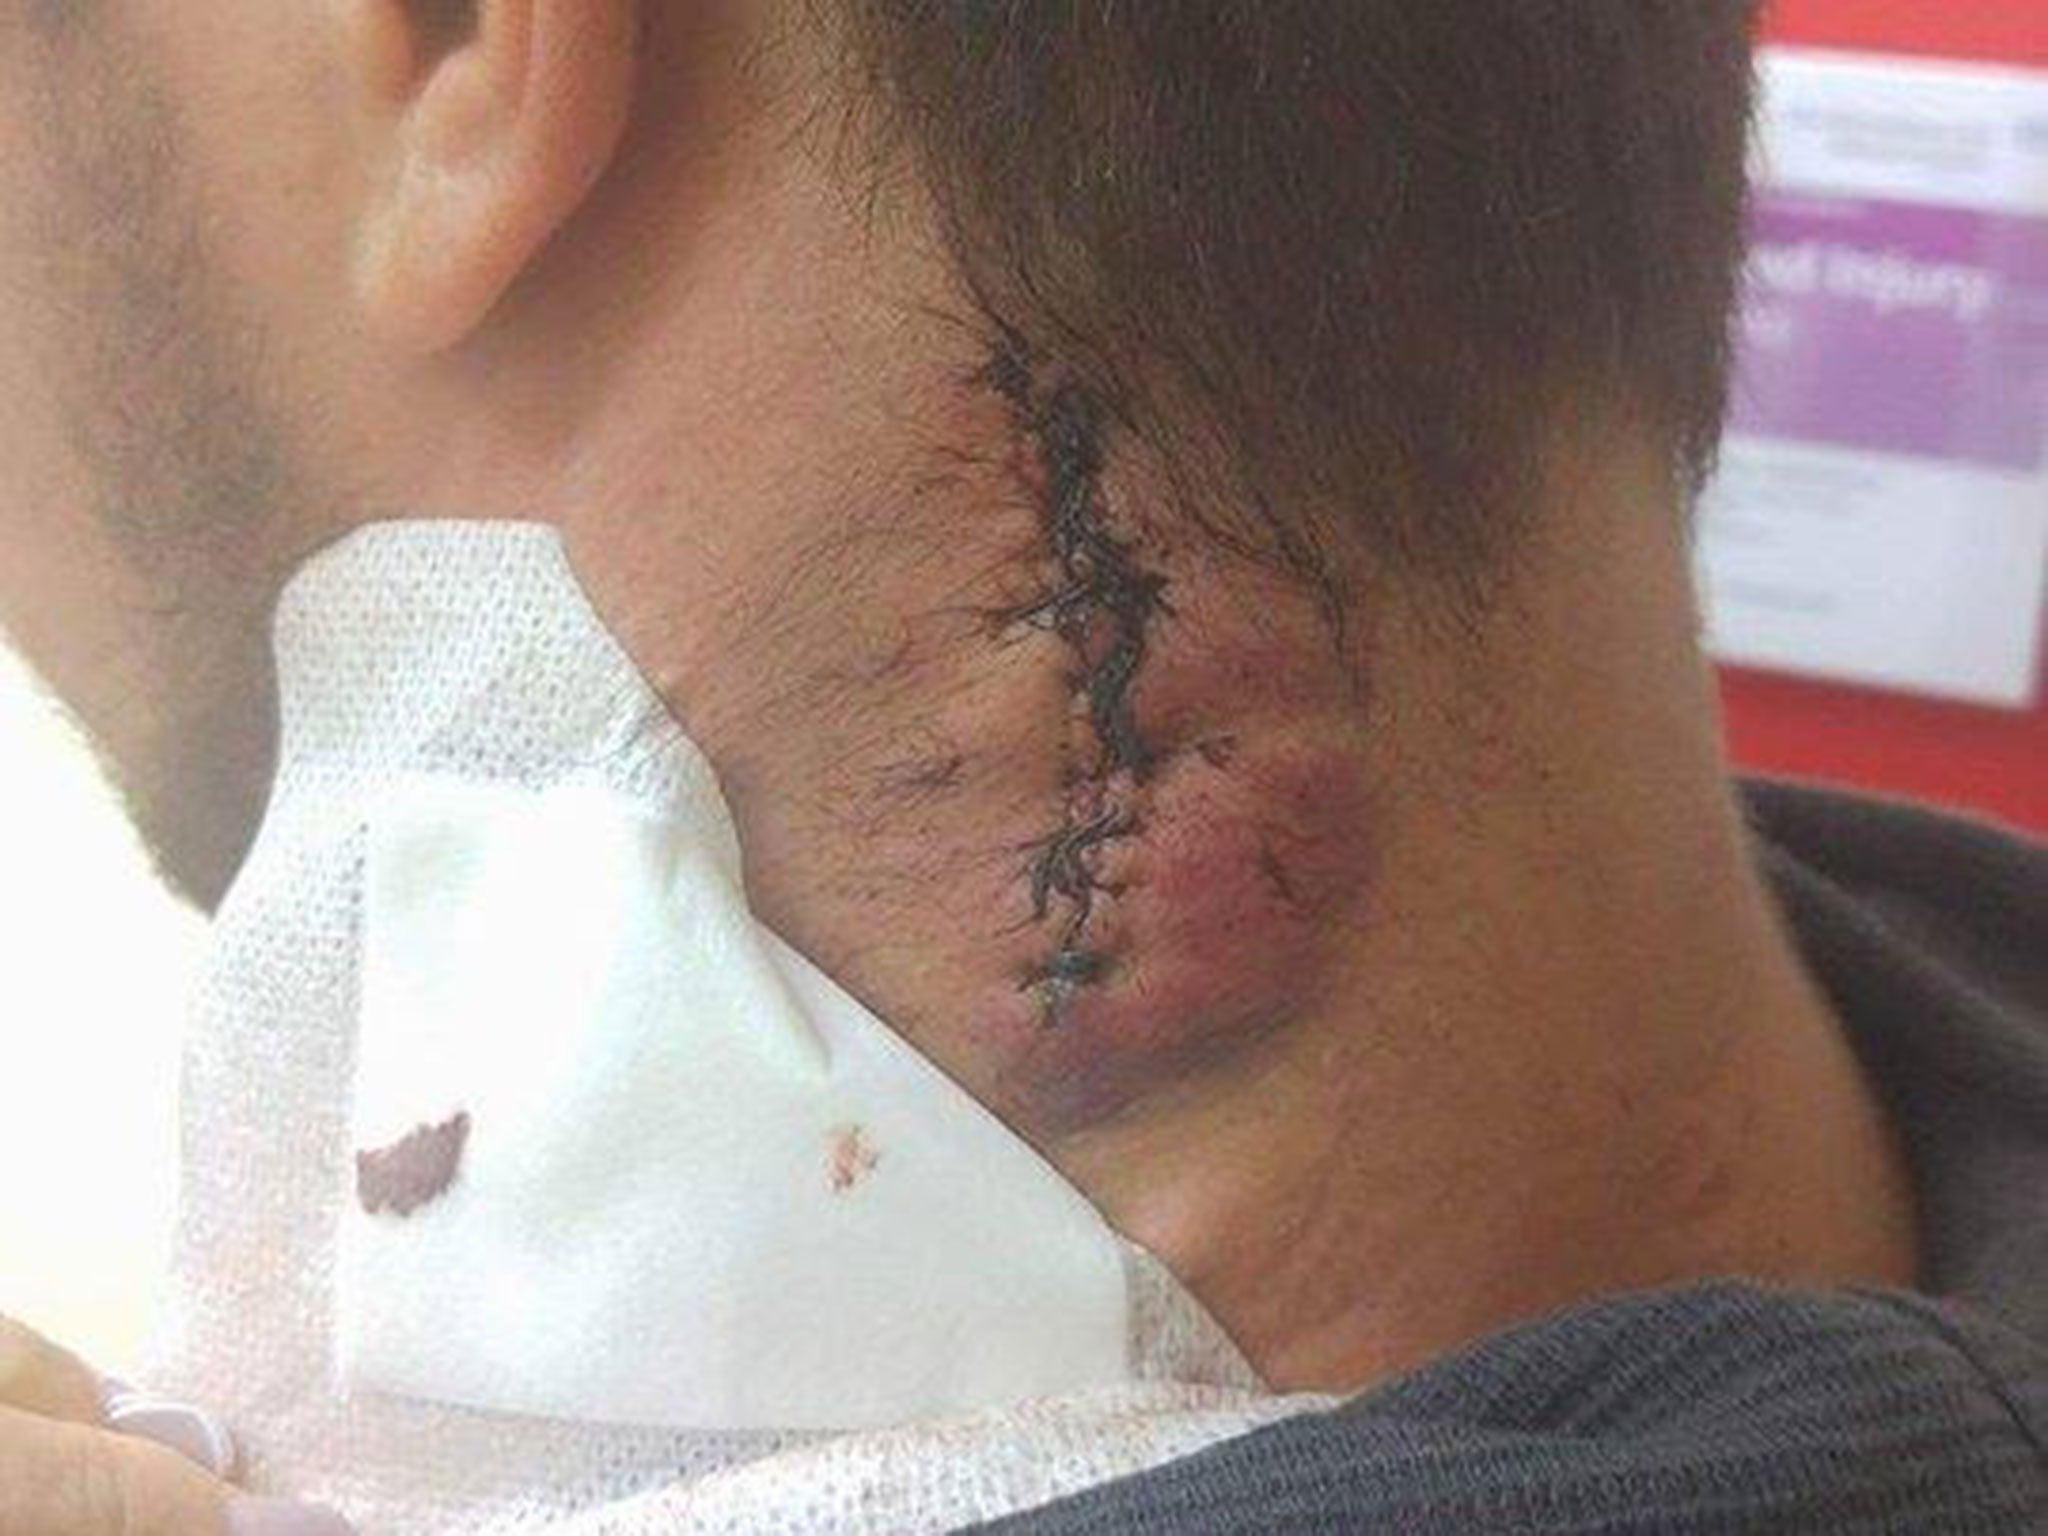 Bartosz Milewski needed 13 stitches after being stabbed in the neck